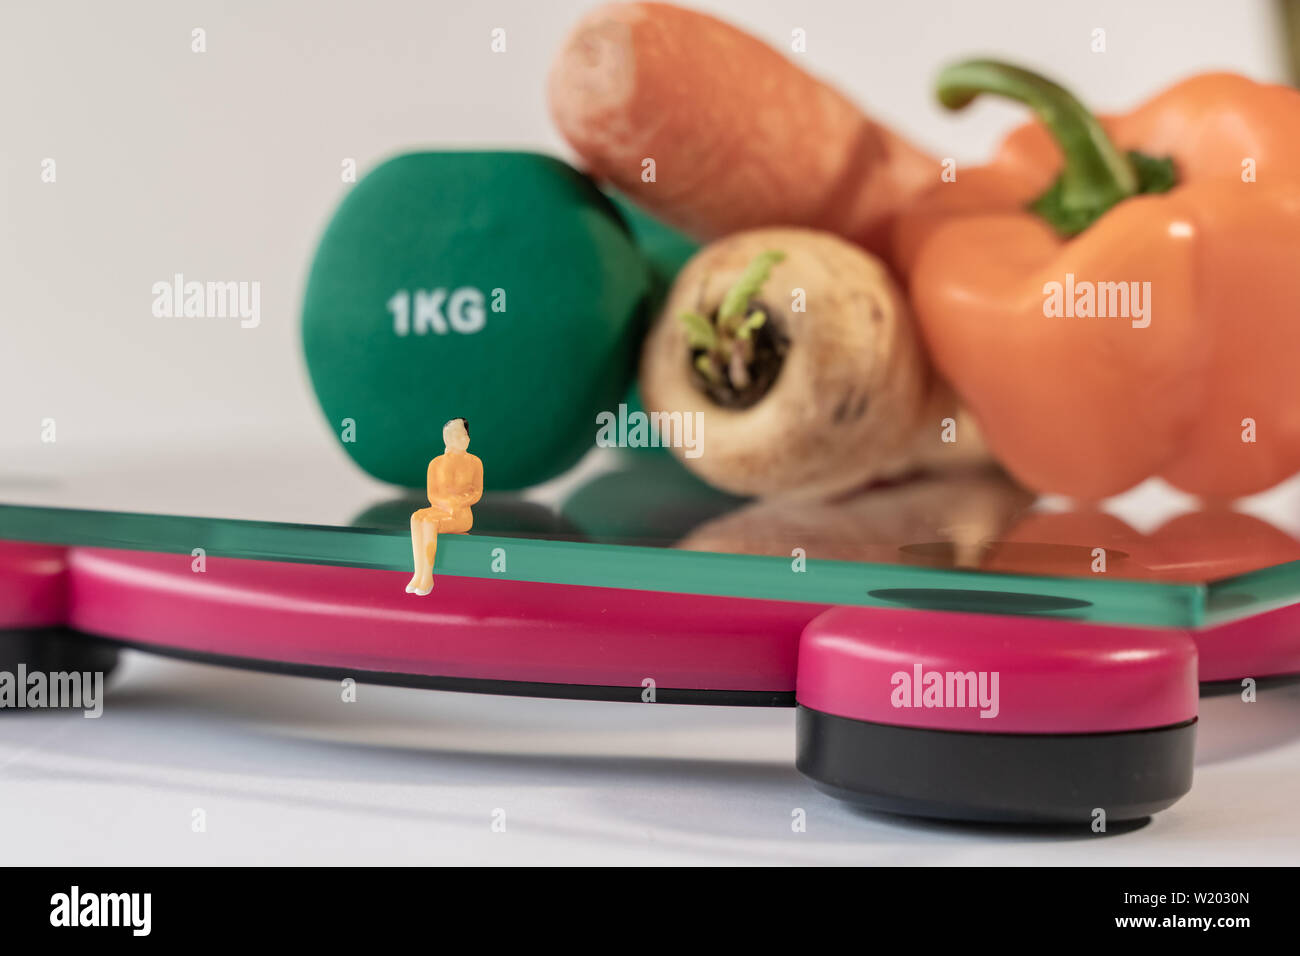 Miniature woman figure siting on the digital electronic bathroom scale for weight of human body. Fresh vegetables and green dumbbells at shallow depth Stock Photo